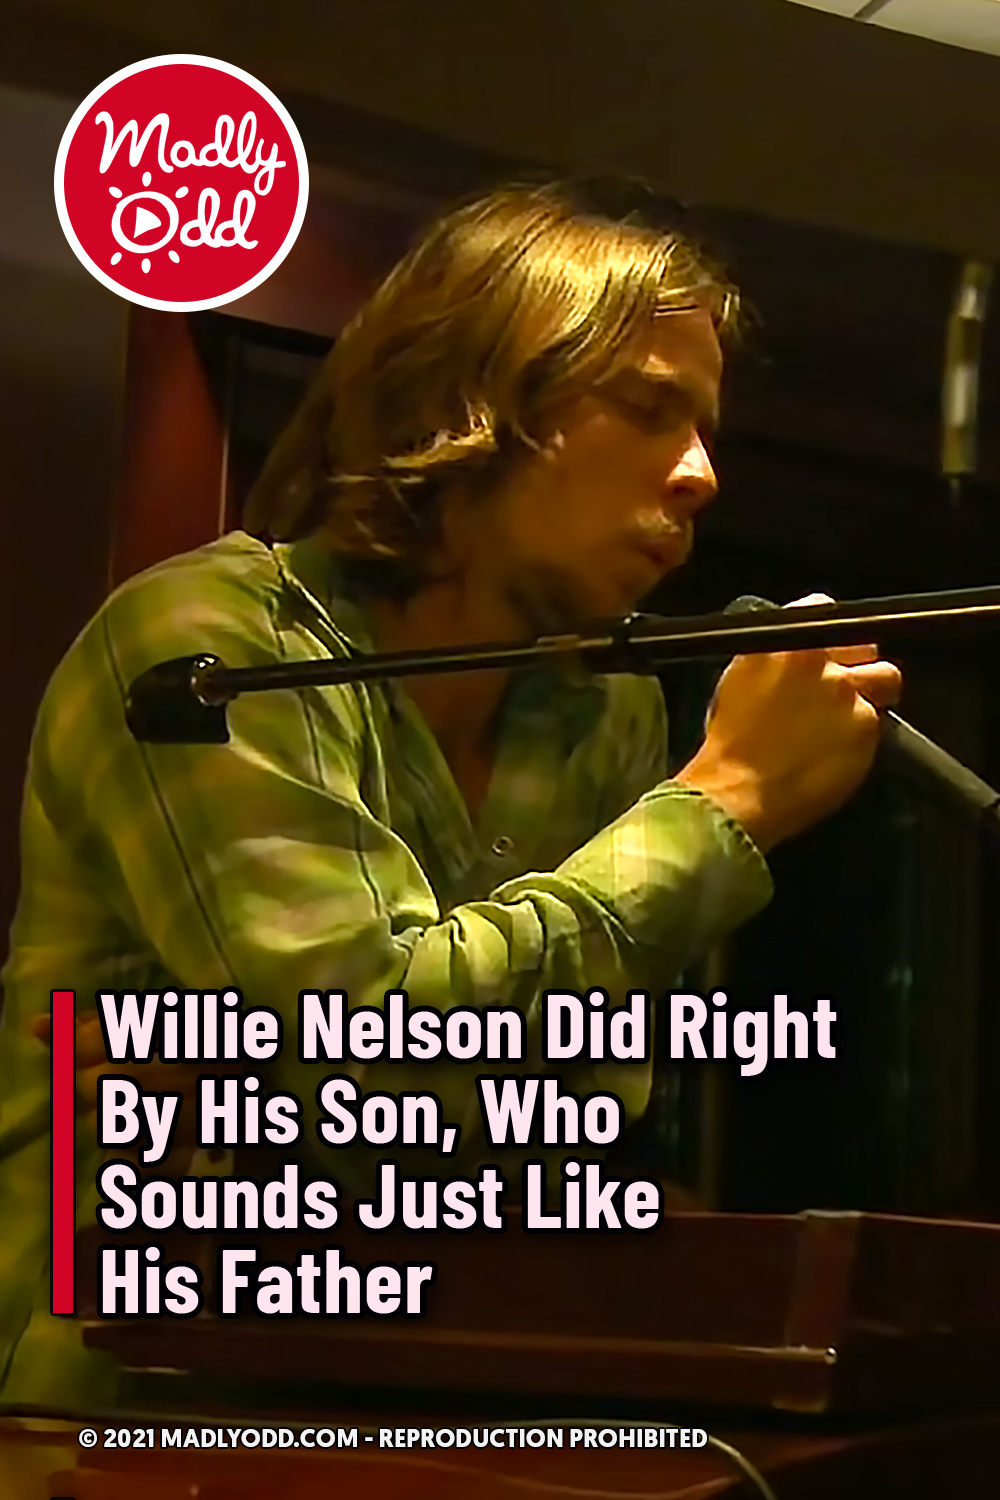 Willie Nelson Did Right By His Son, Who Sounds Just Like His Father